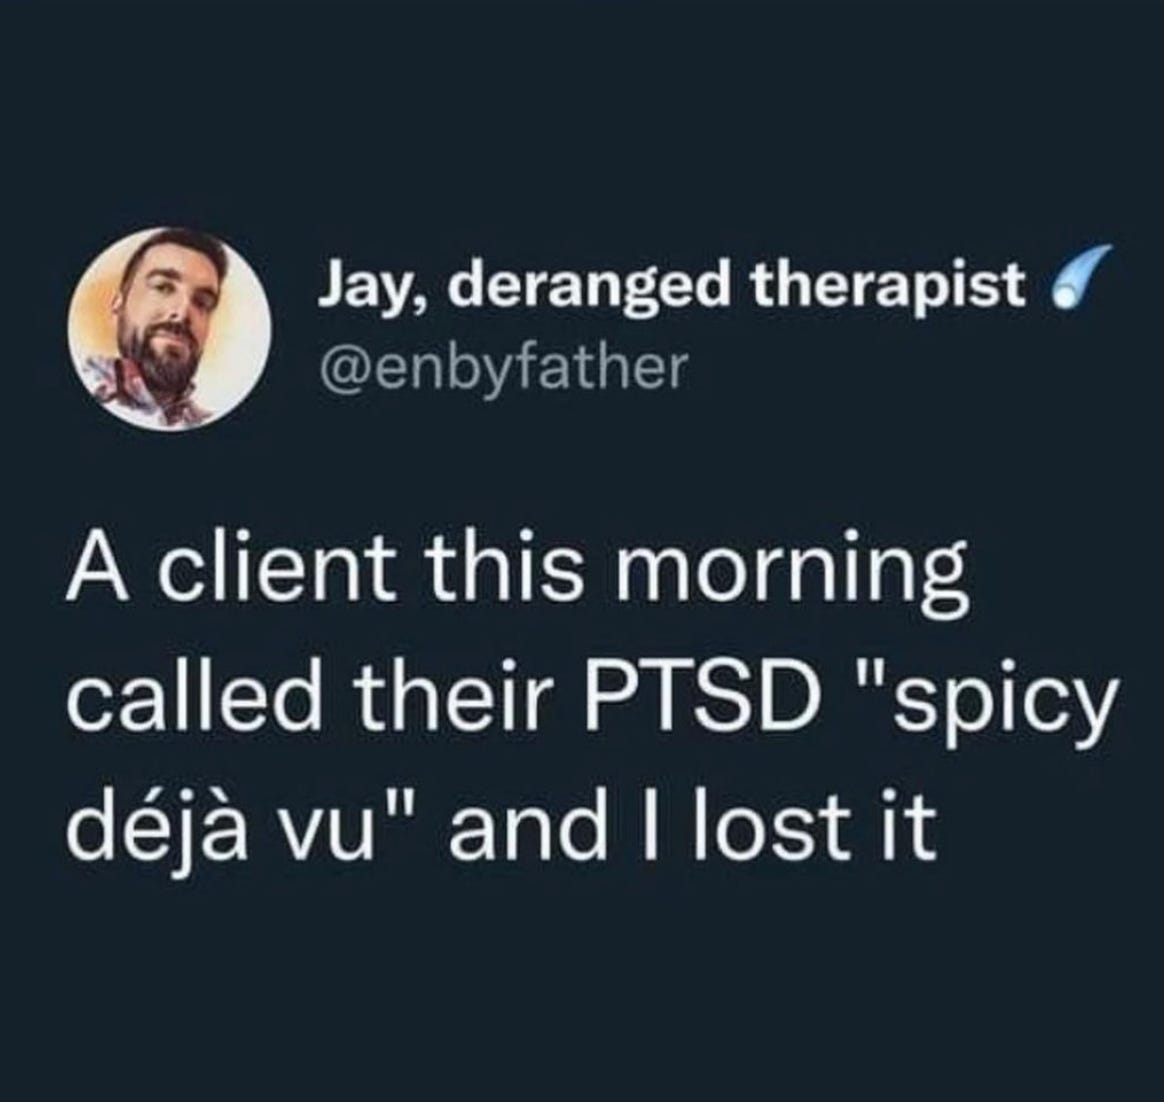 A tweet by @enbyfather: A client this morning called their PTSD "spicy déjà vu" and I lost it."